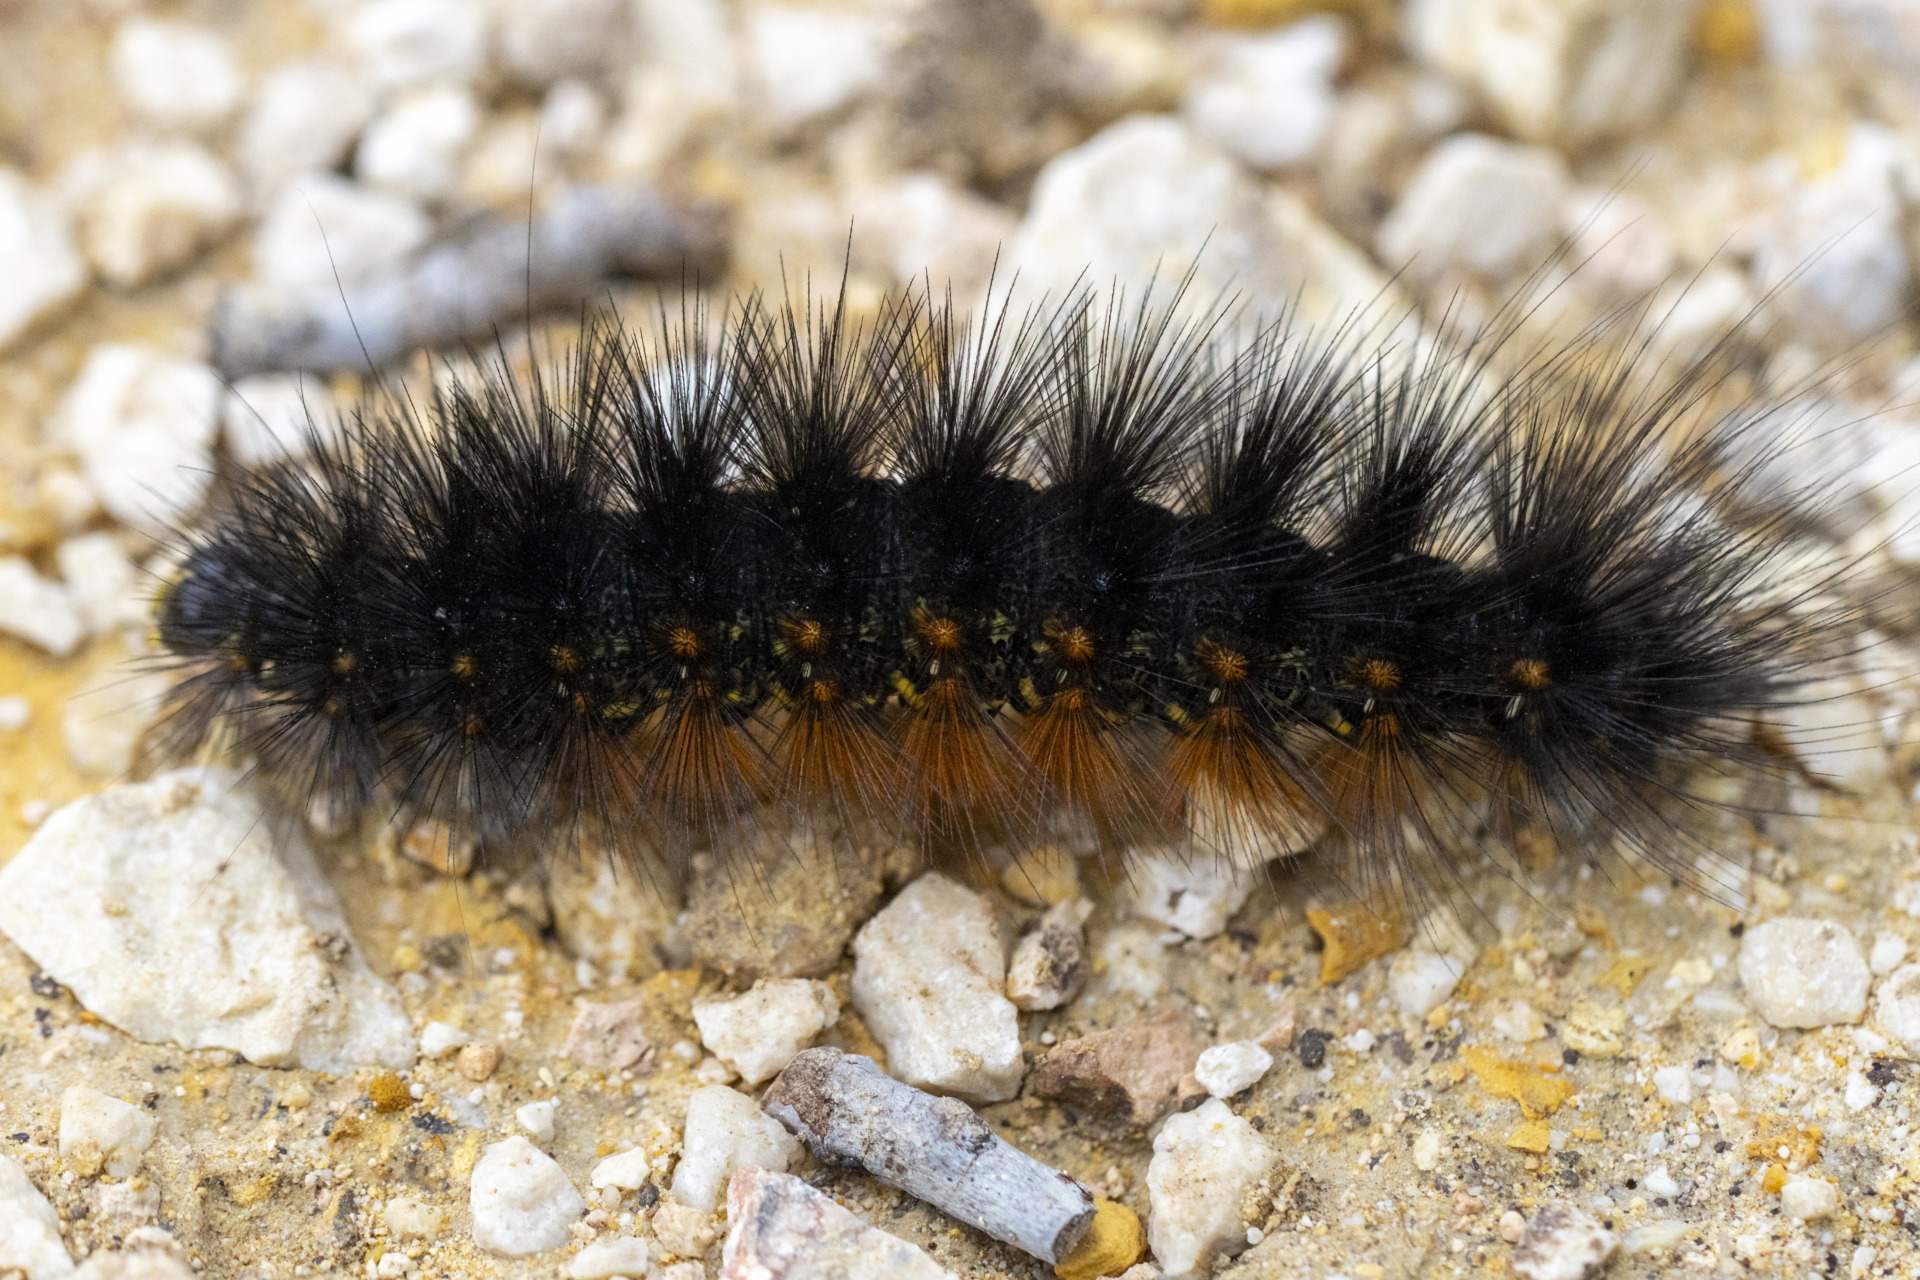 What is that fuzzy black caterpillar?